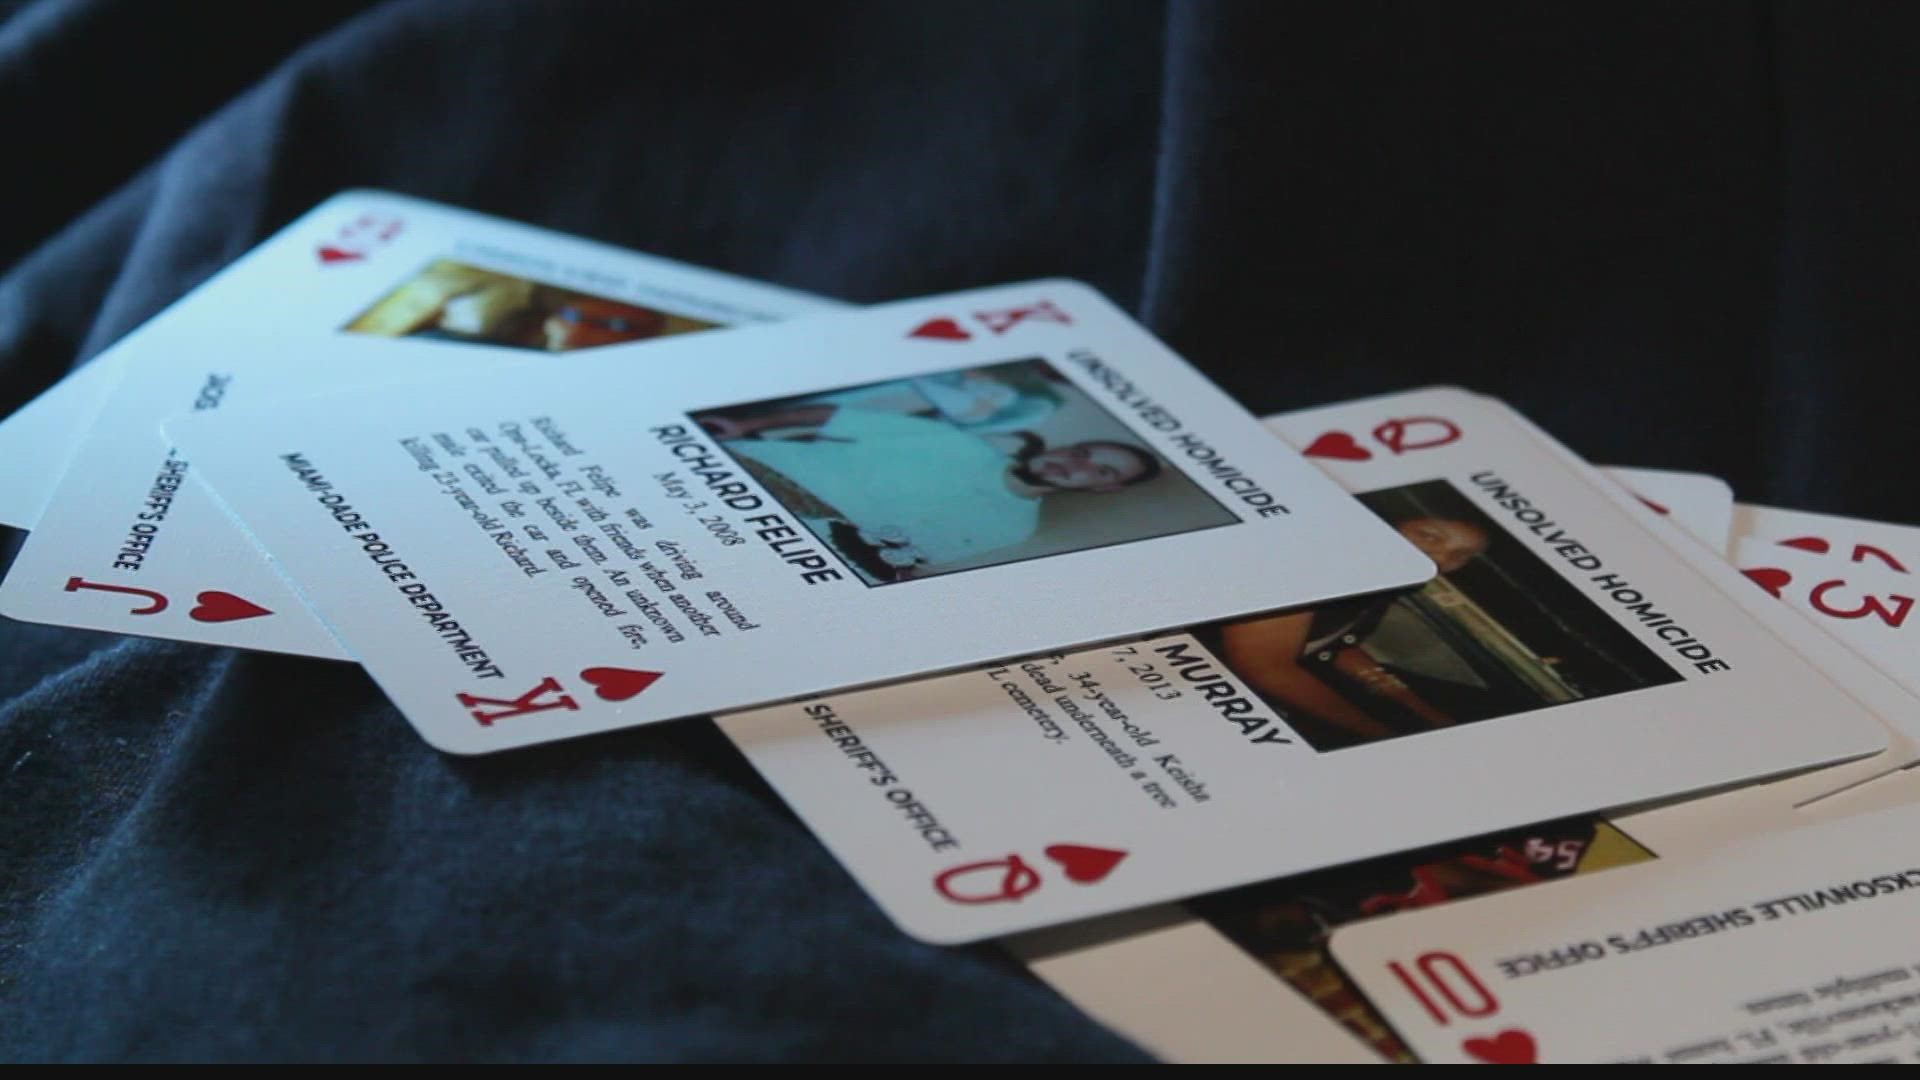 Ryan Backman, the founder of Project: Cold Case, is working to get the cards into jails around the state as well as businesses.